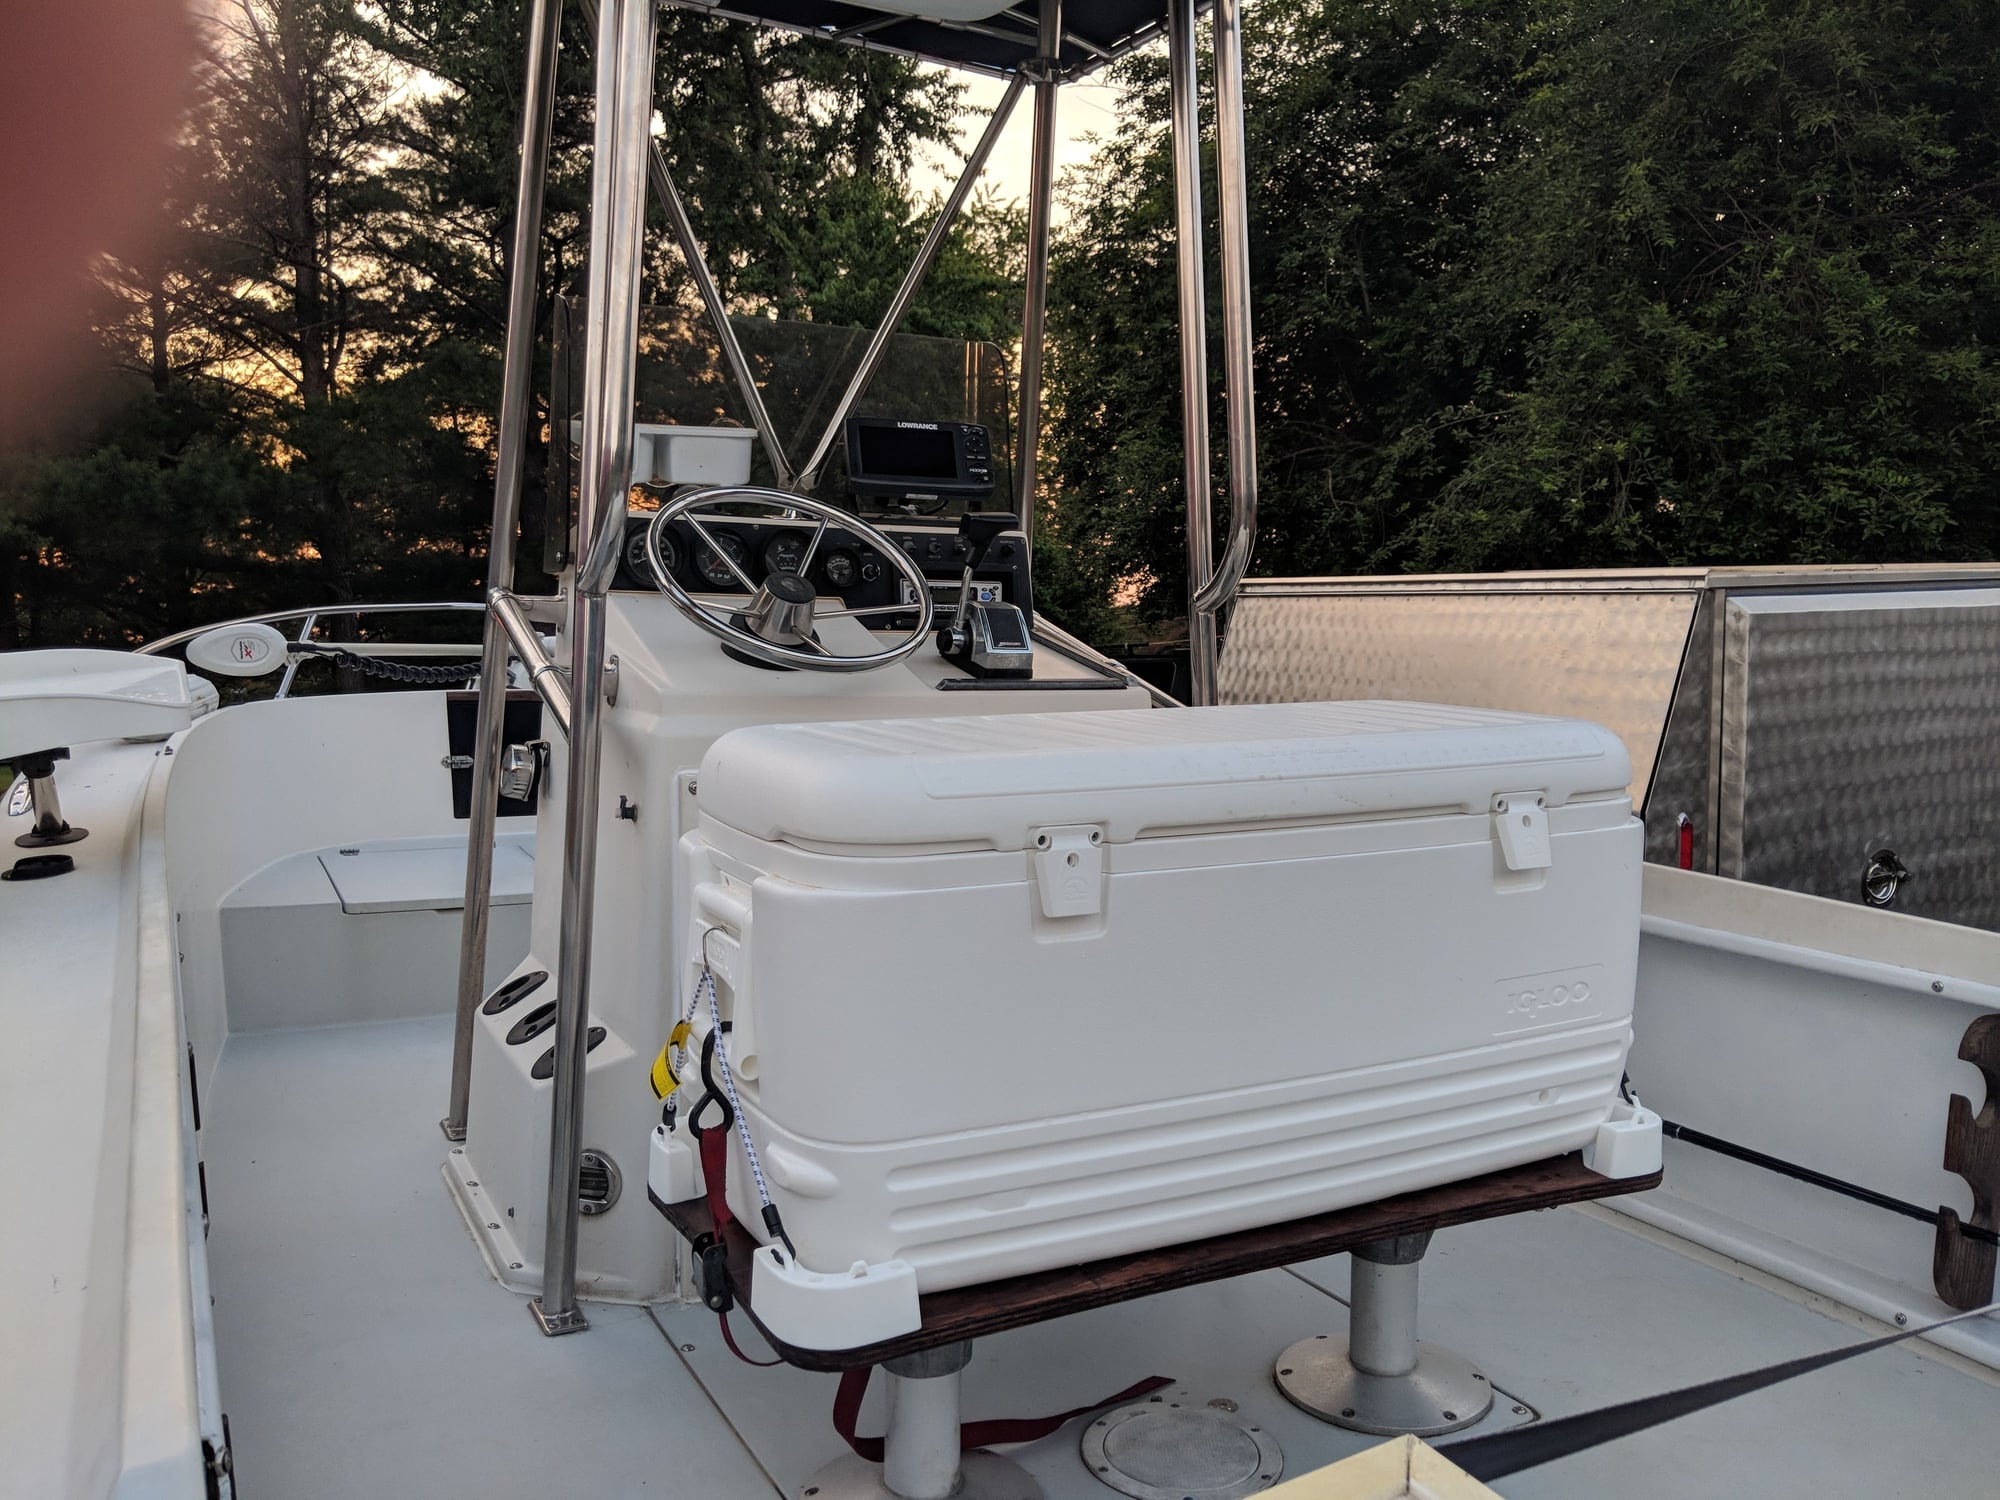 1988 Wellcraft 20 Sport Fisher front seating question - The Hull